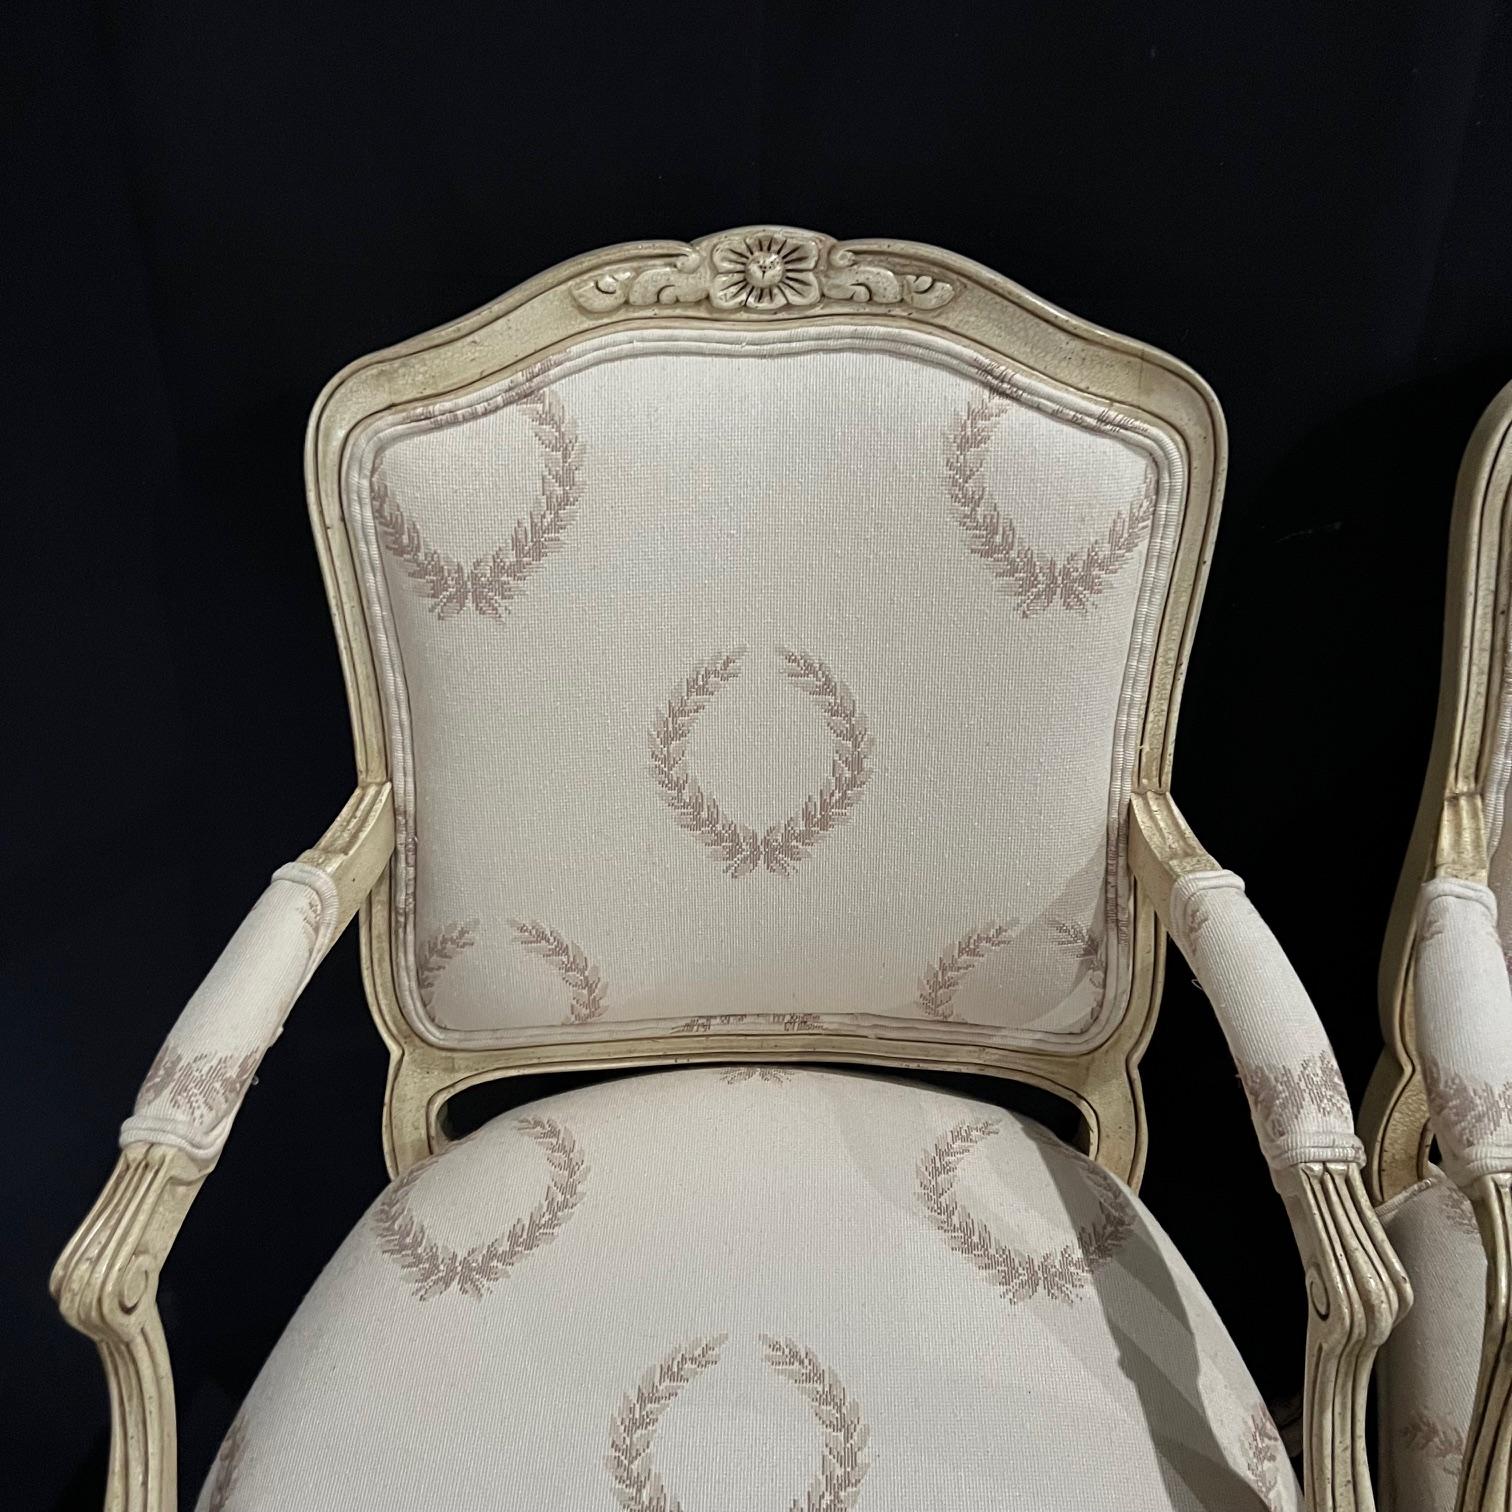 Elegant and classic vintage Louis XV armchairs or fauteuils in immaculate condition, with lovely contrasting fabric on back. Classic Louis XV carved florets and tapered cabriole legs. Original off white paint.
#4675